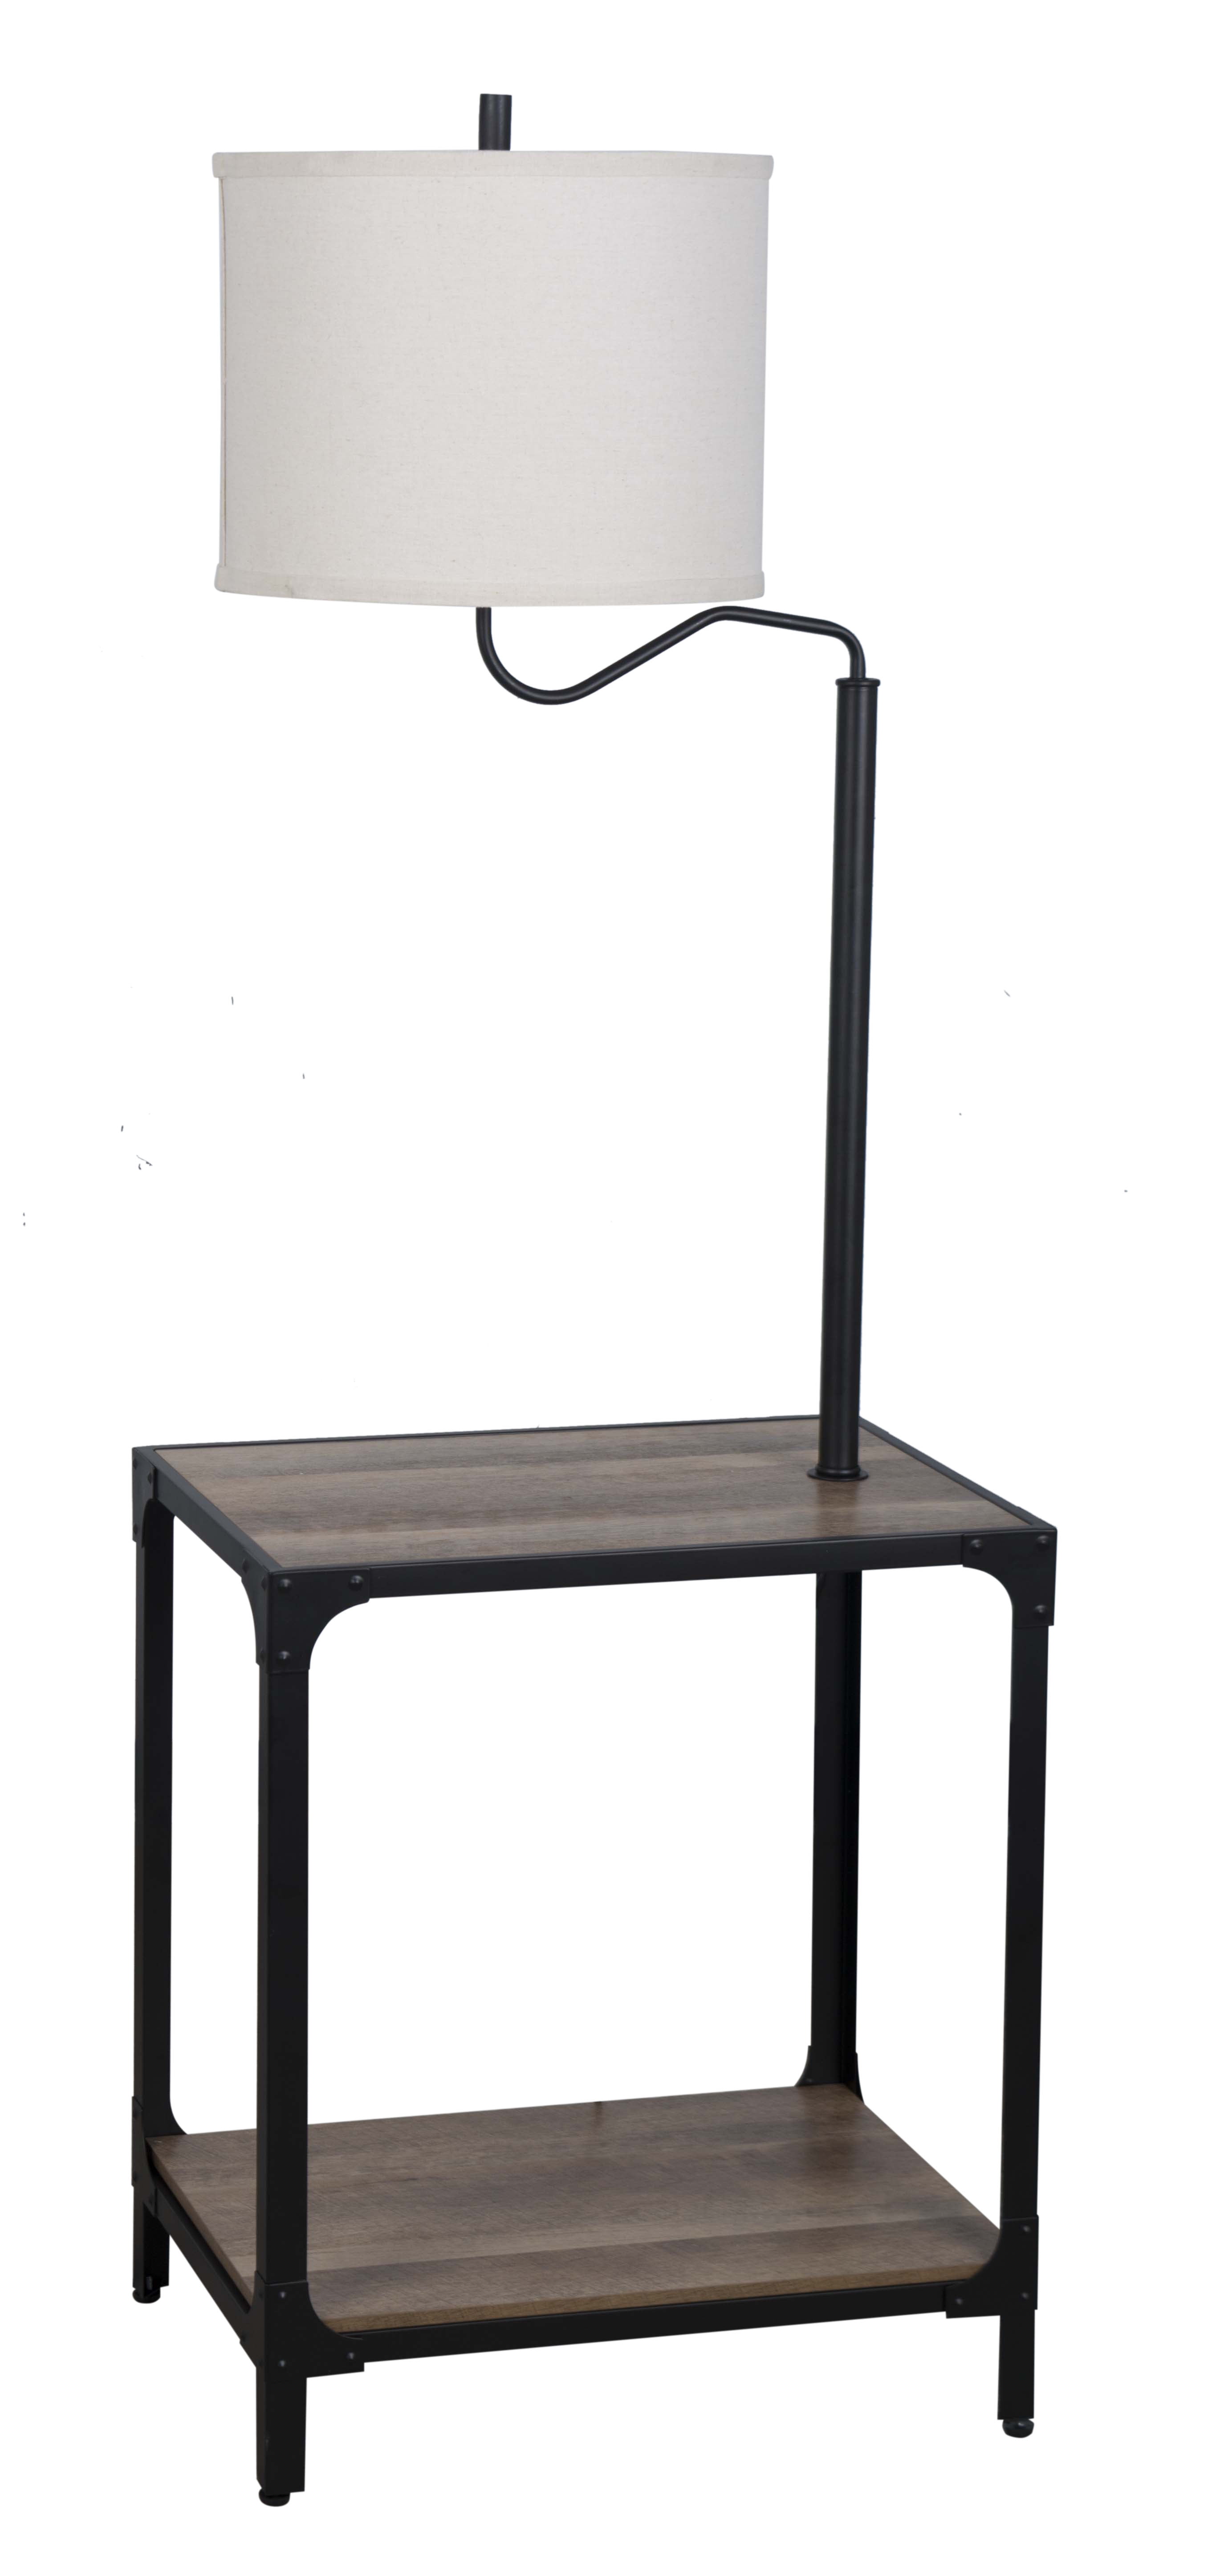 End Table Floor Lamp With Usb Port, How Big Should A Lamp Be On An End Table